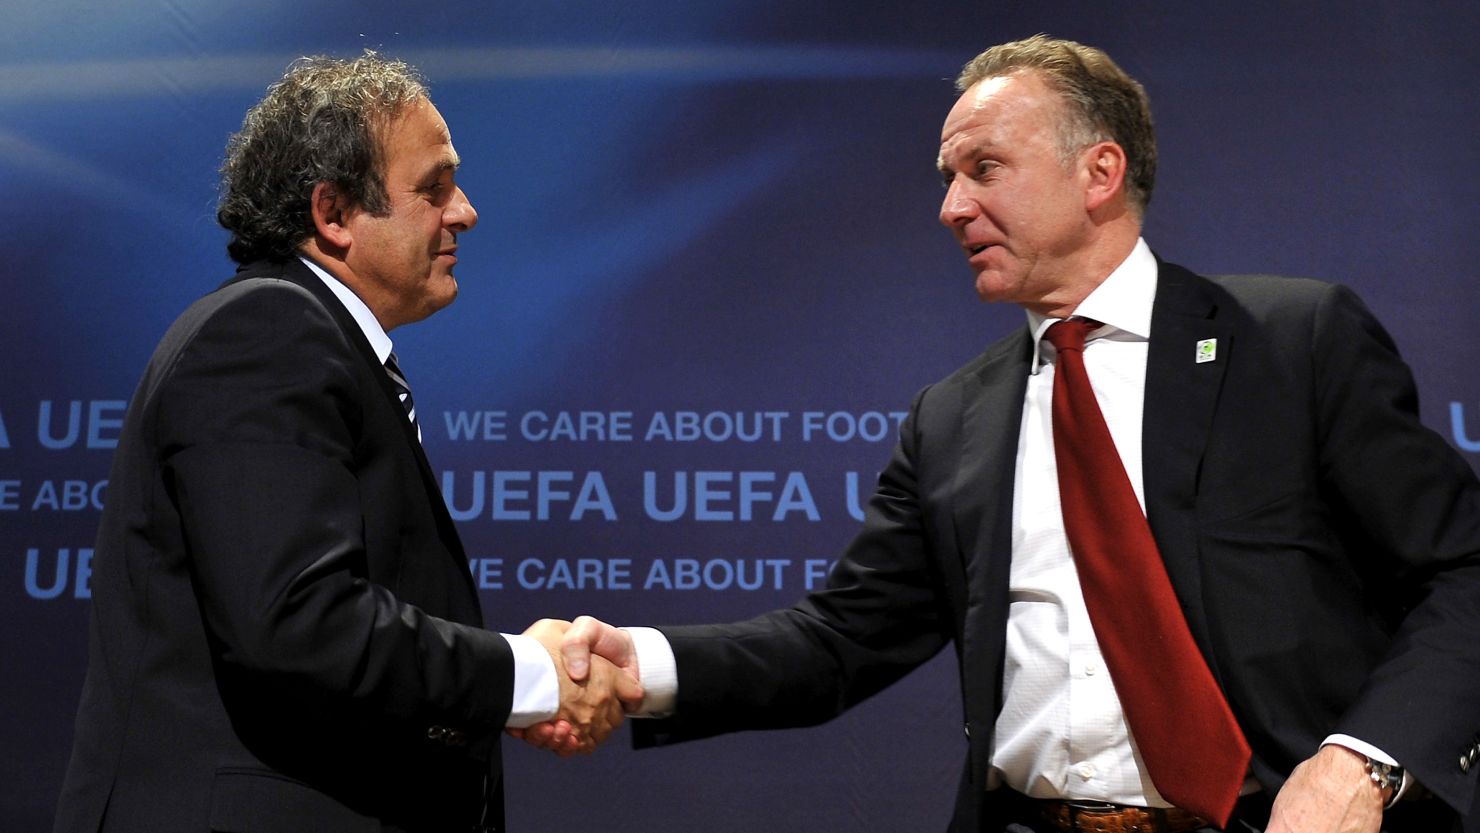 UEFA president Michel Platini (left) and ECA chairman Karl-Heinz Rummenigge have reached an agreement.